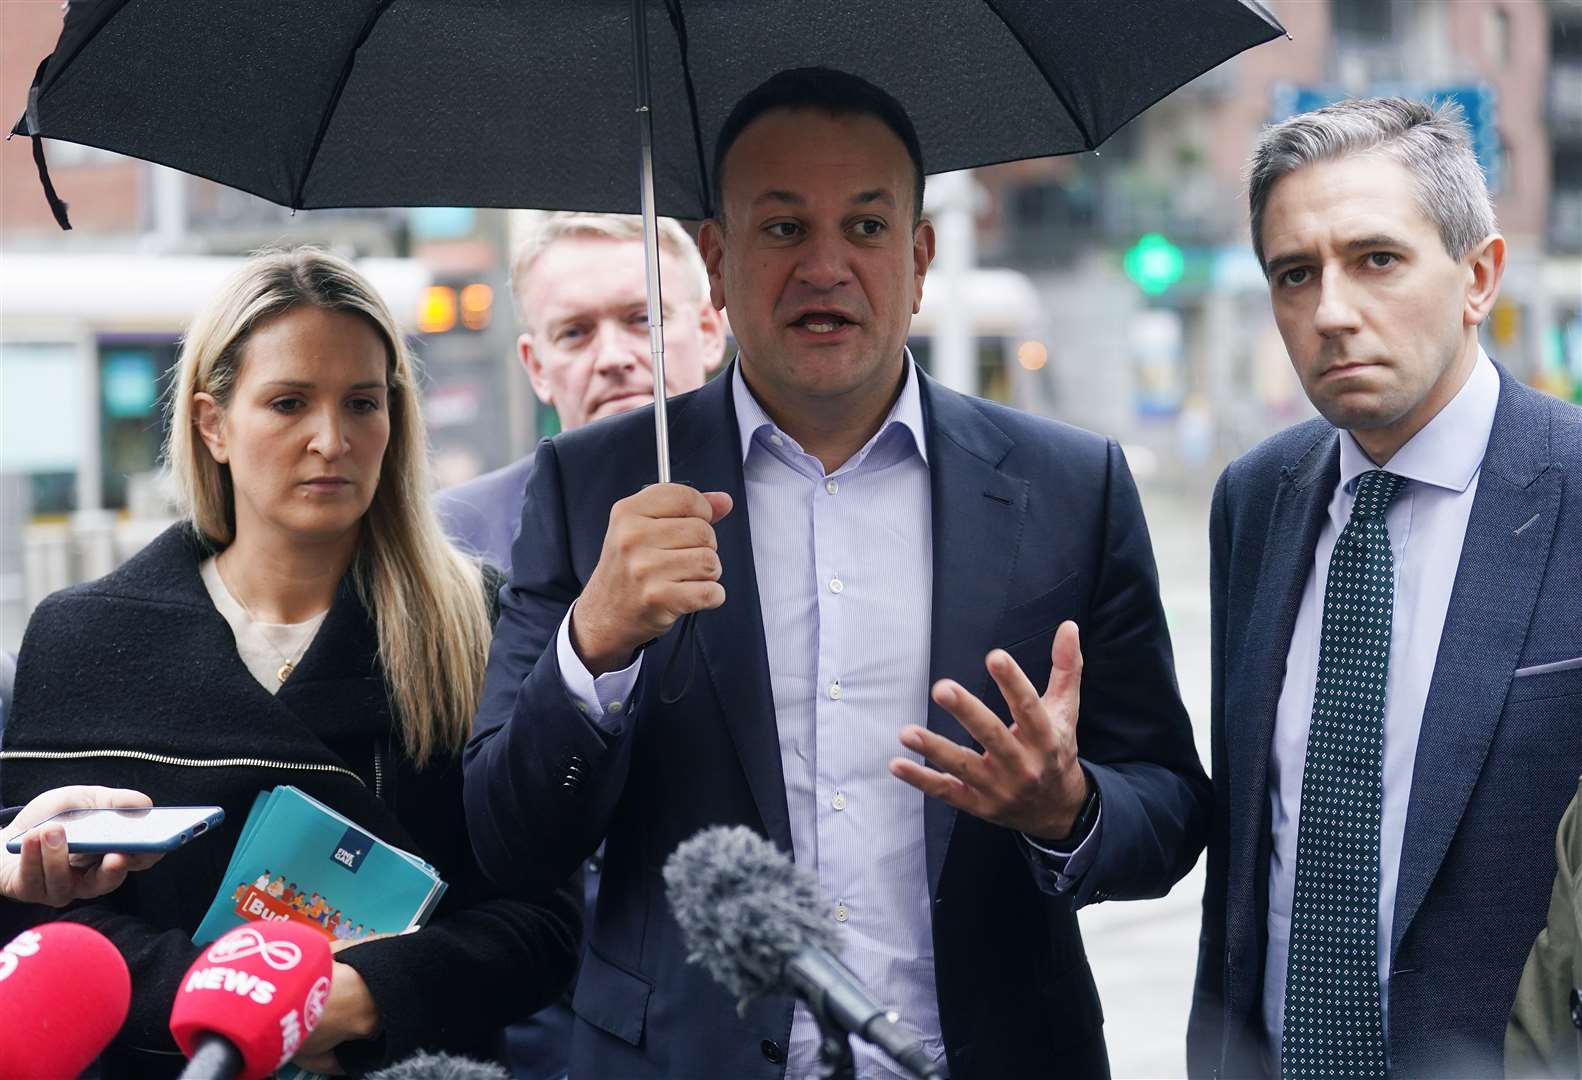 Minister for Justice Helen McEntee (left) and Minister for Further and Higher Education Simon Harris are among those tipped to succeed Leo Varadkar (centre) (Brian Lawless/PA)